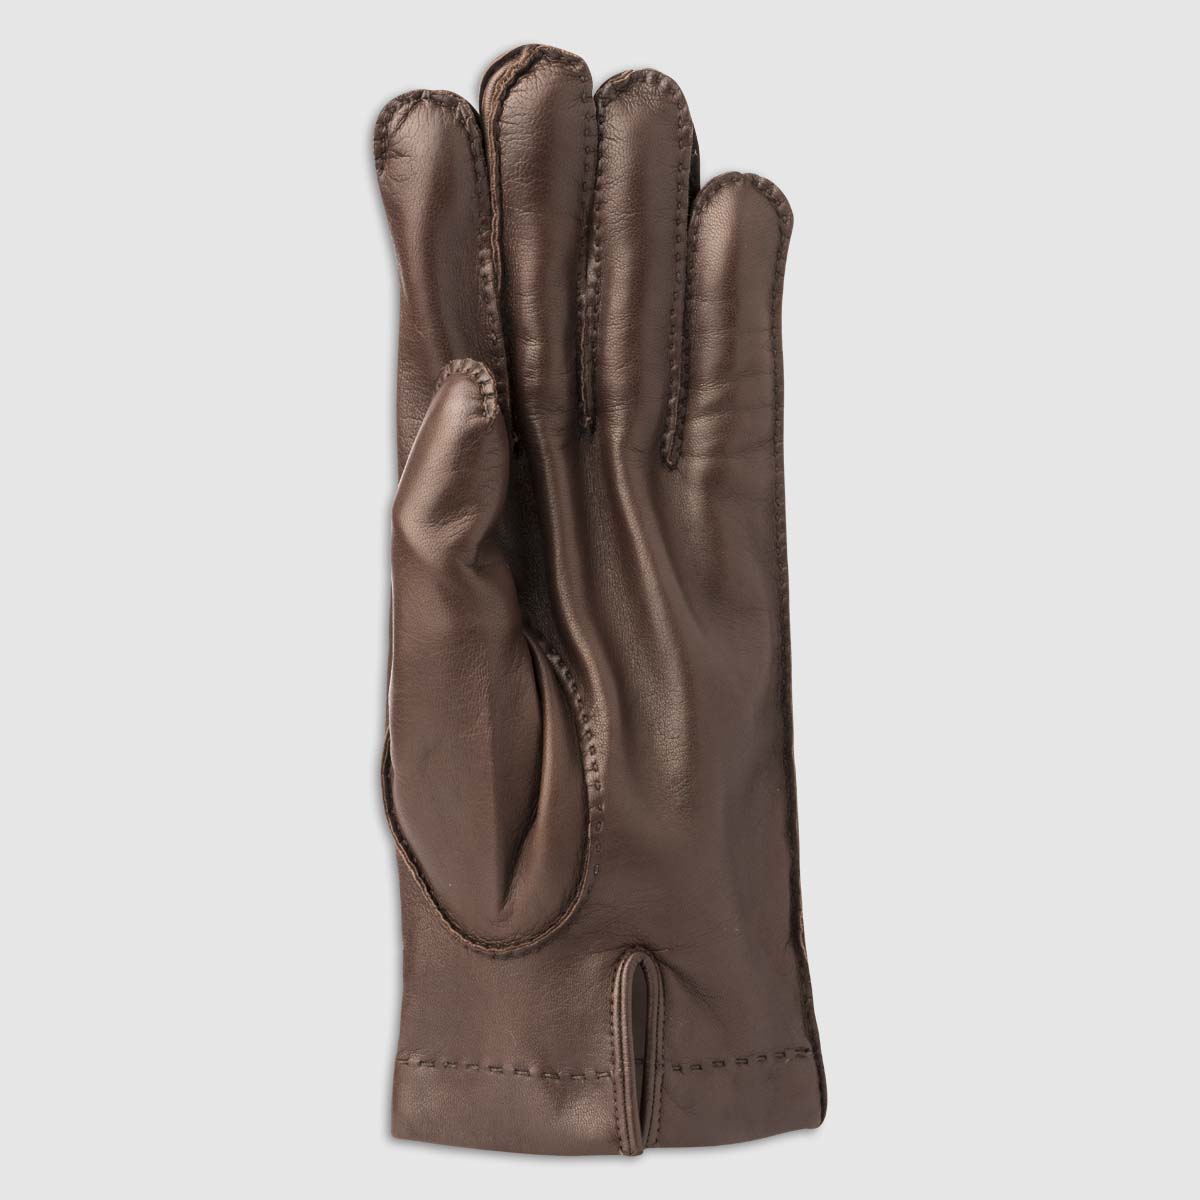 Hand-Stitched Nappa Leather Glove with Cashmere Lining in Conker Alpo Guanti on sale 2022 2